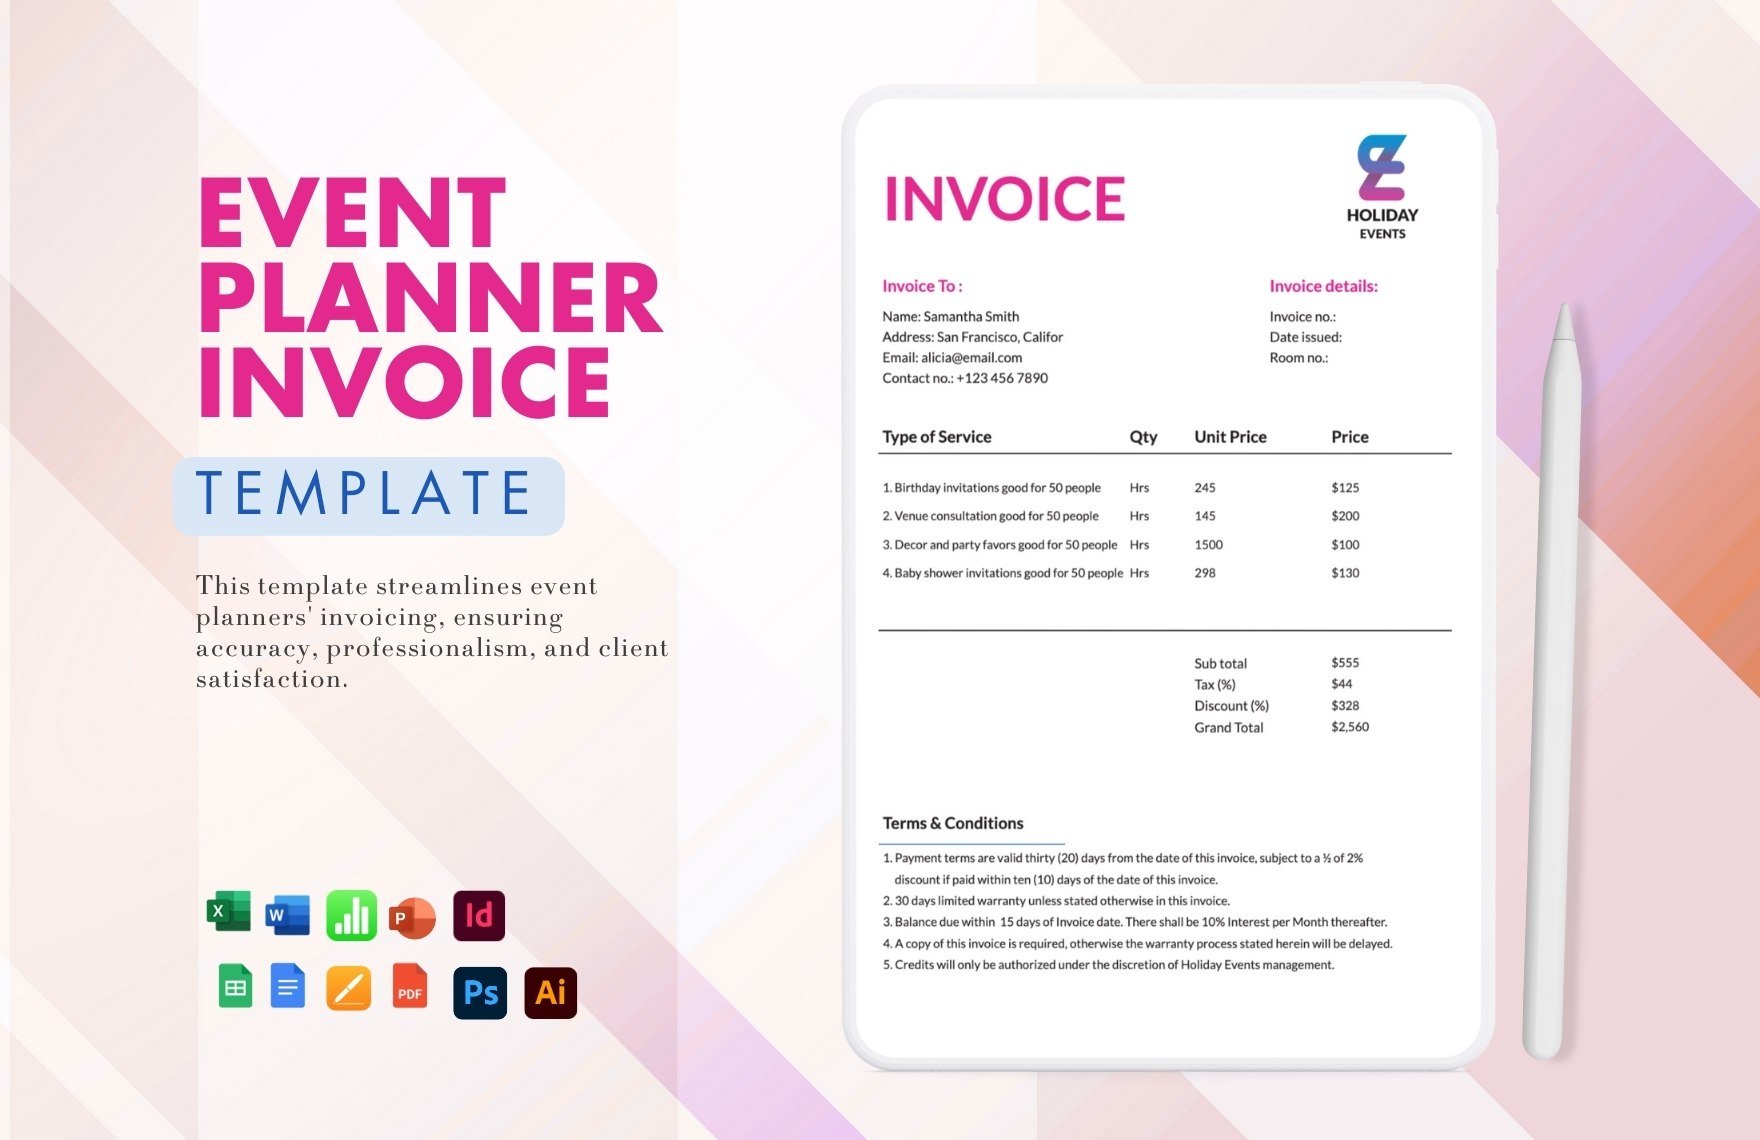 Free Event Planner Invoice Template in Word, Google Docs, Excel, PDF, Google Sheets, Illustrator, PSD, Apple Pages, Publisher, InDesign, Apple Numbers